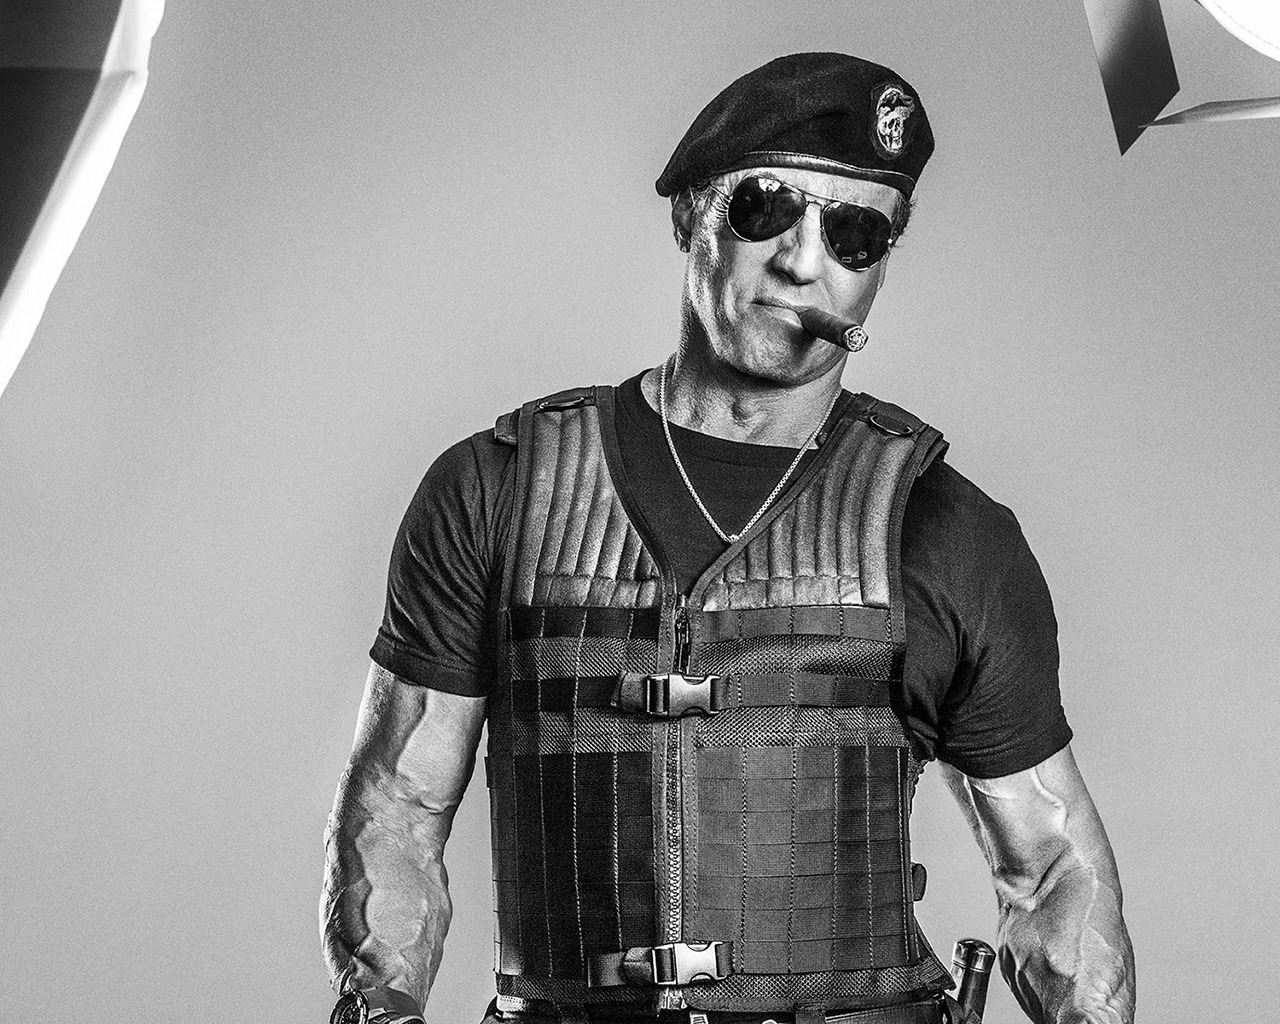 Sylvester Stallone The Expendables 3 for 1280 x 1024 resolution